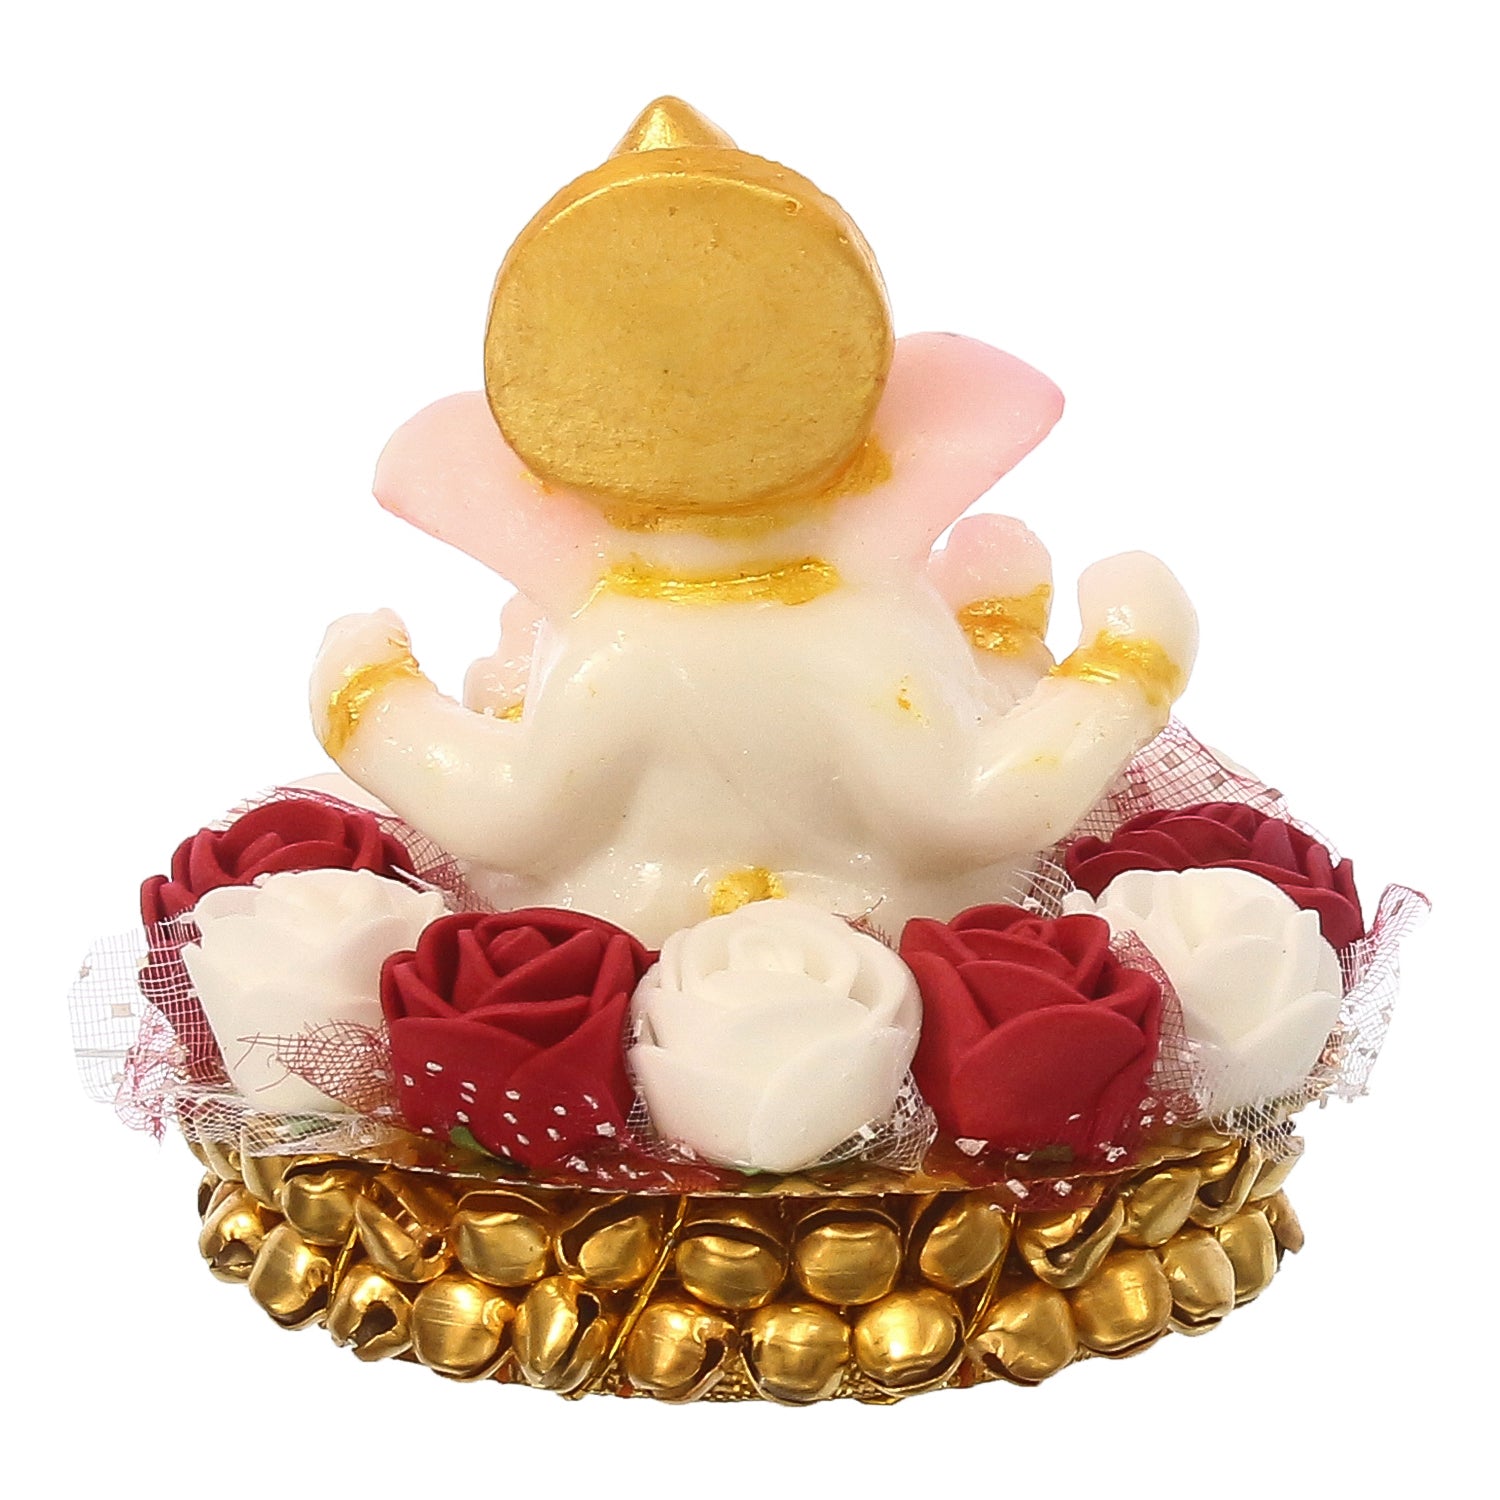 Golden and White Polyresin Lord Ganesha Idol on Decorative Handcrafted Plate with Red and White Flowers 6